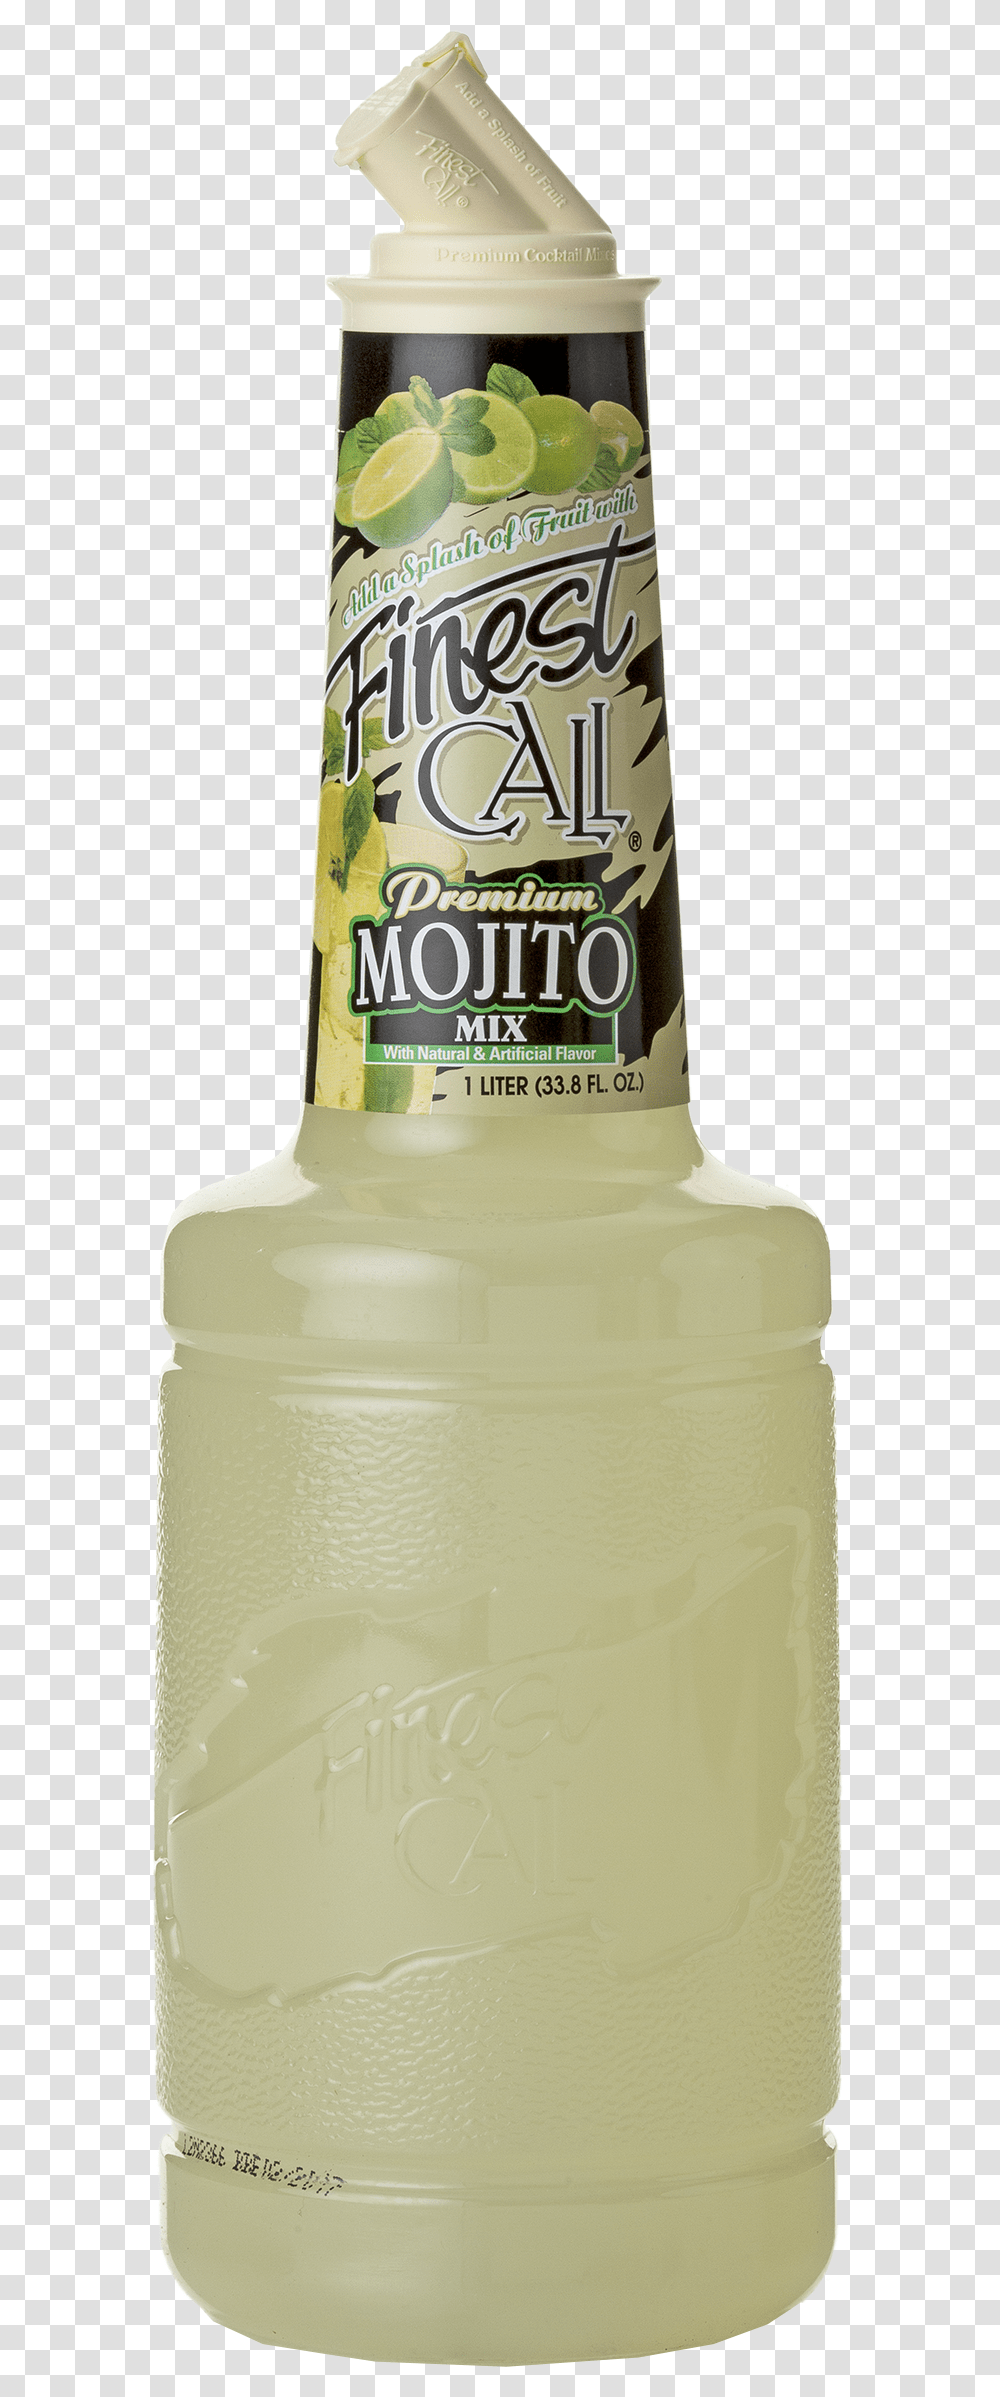 Finest Call Mojito Mix, Milk, Beverage, Bottle, Alcohol Transparent Png